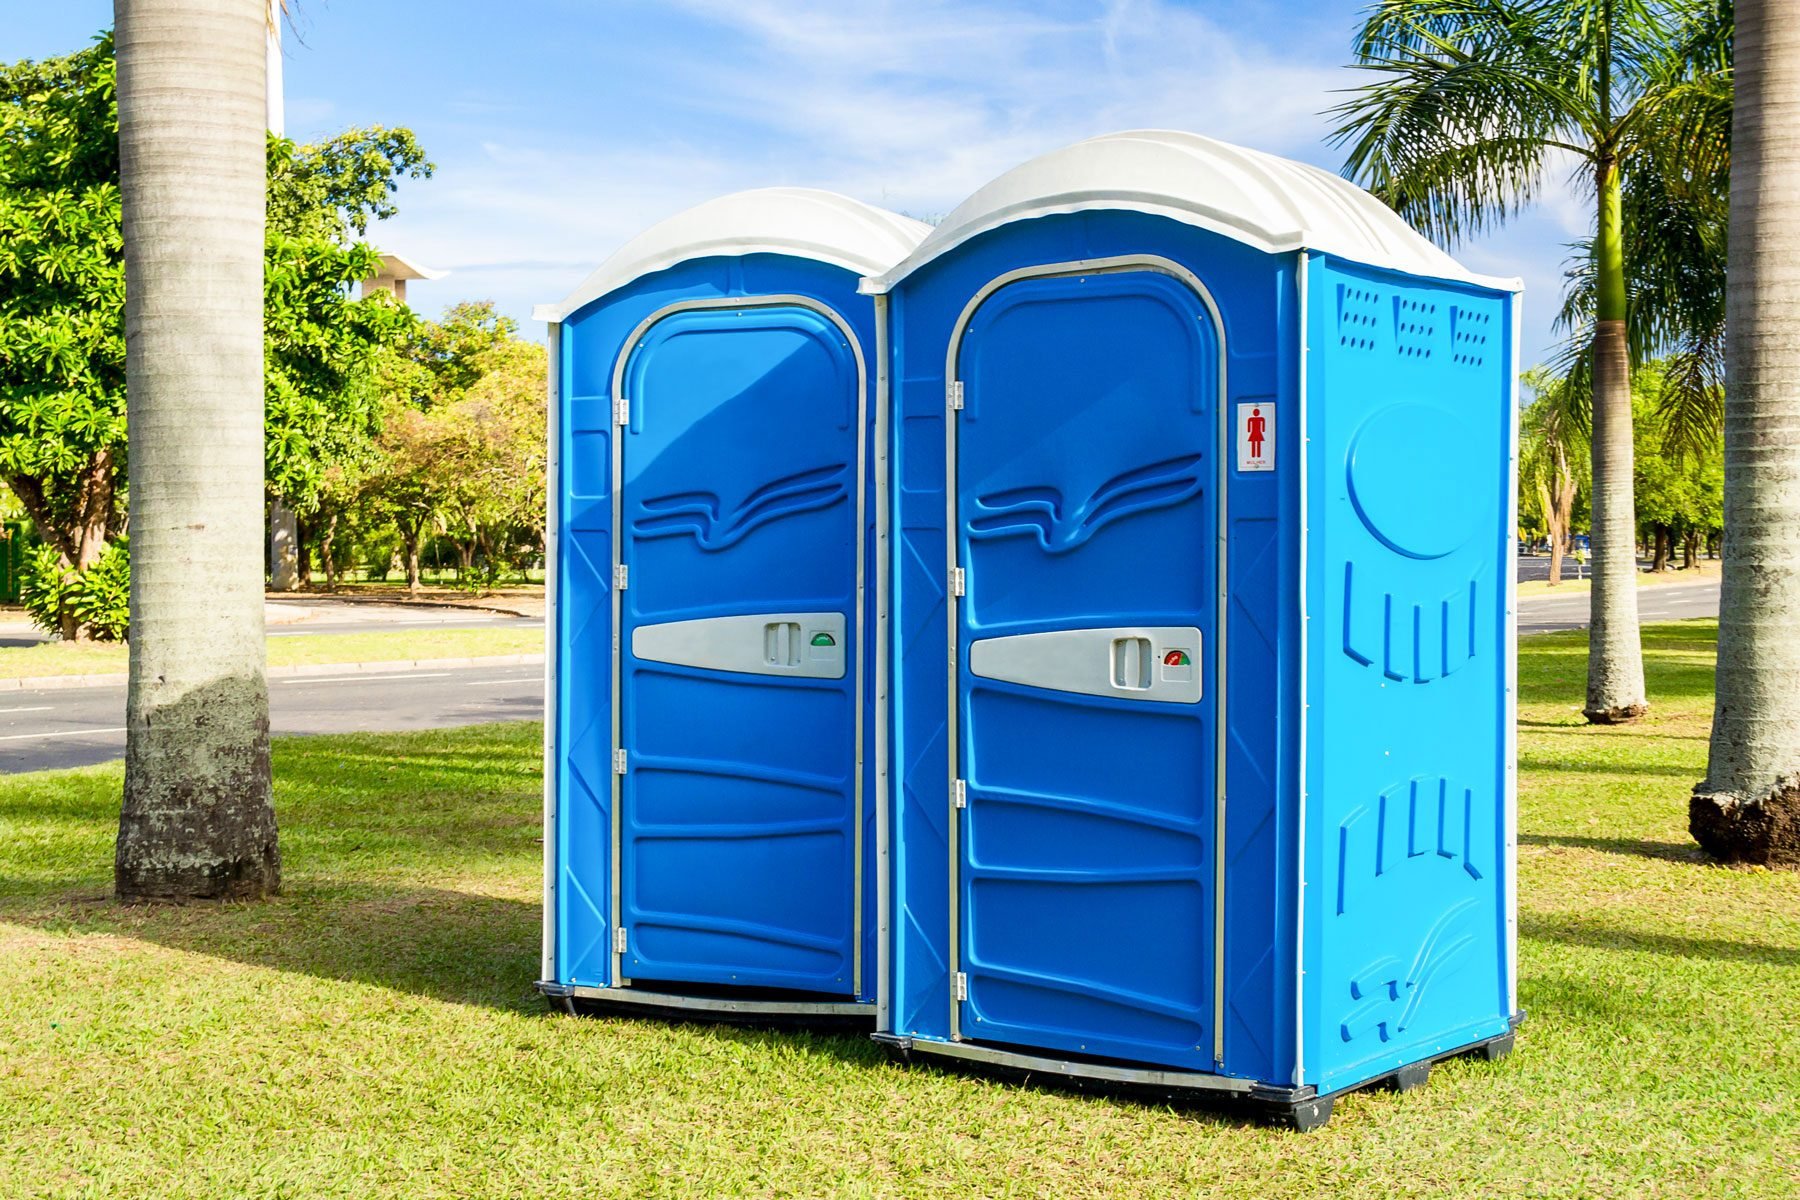 How Much Does It Cost to Rent a Port-a-Potty?